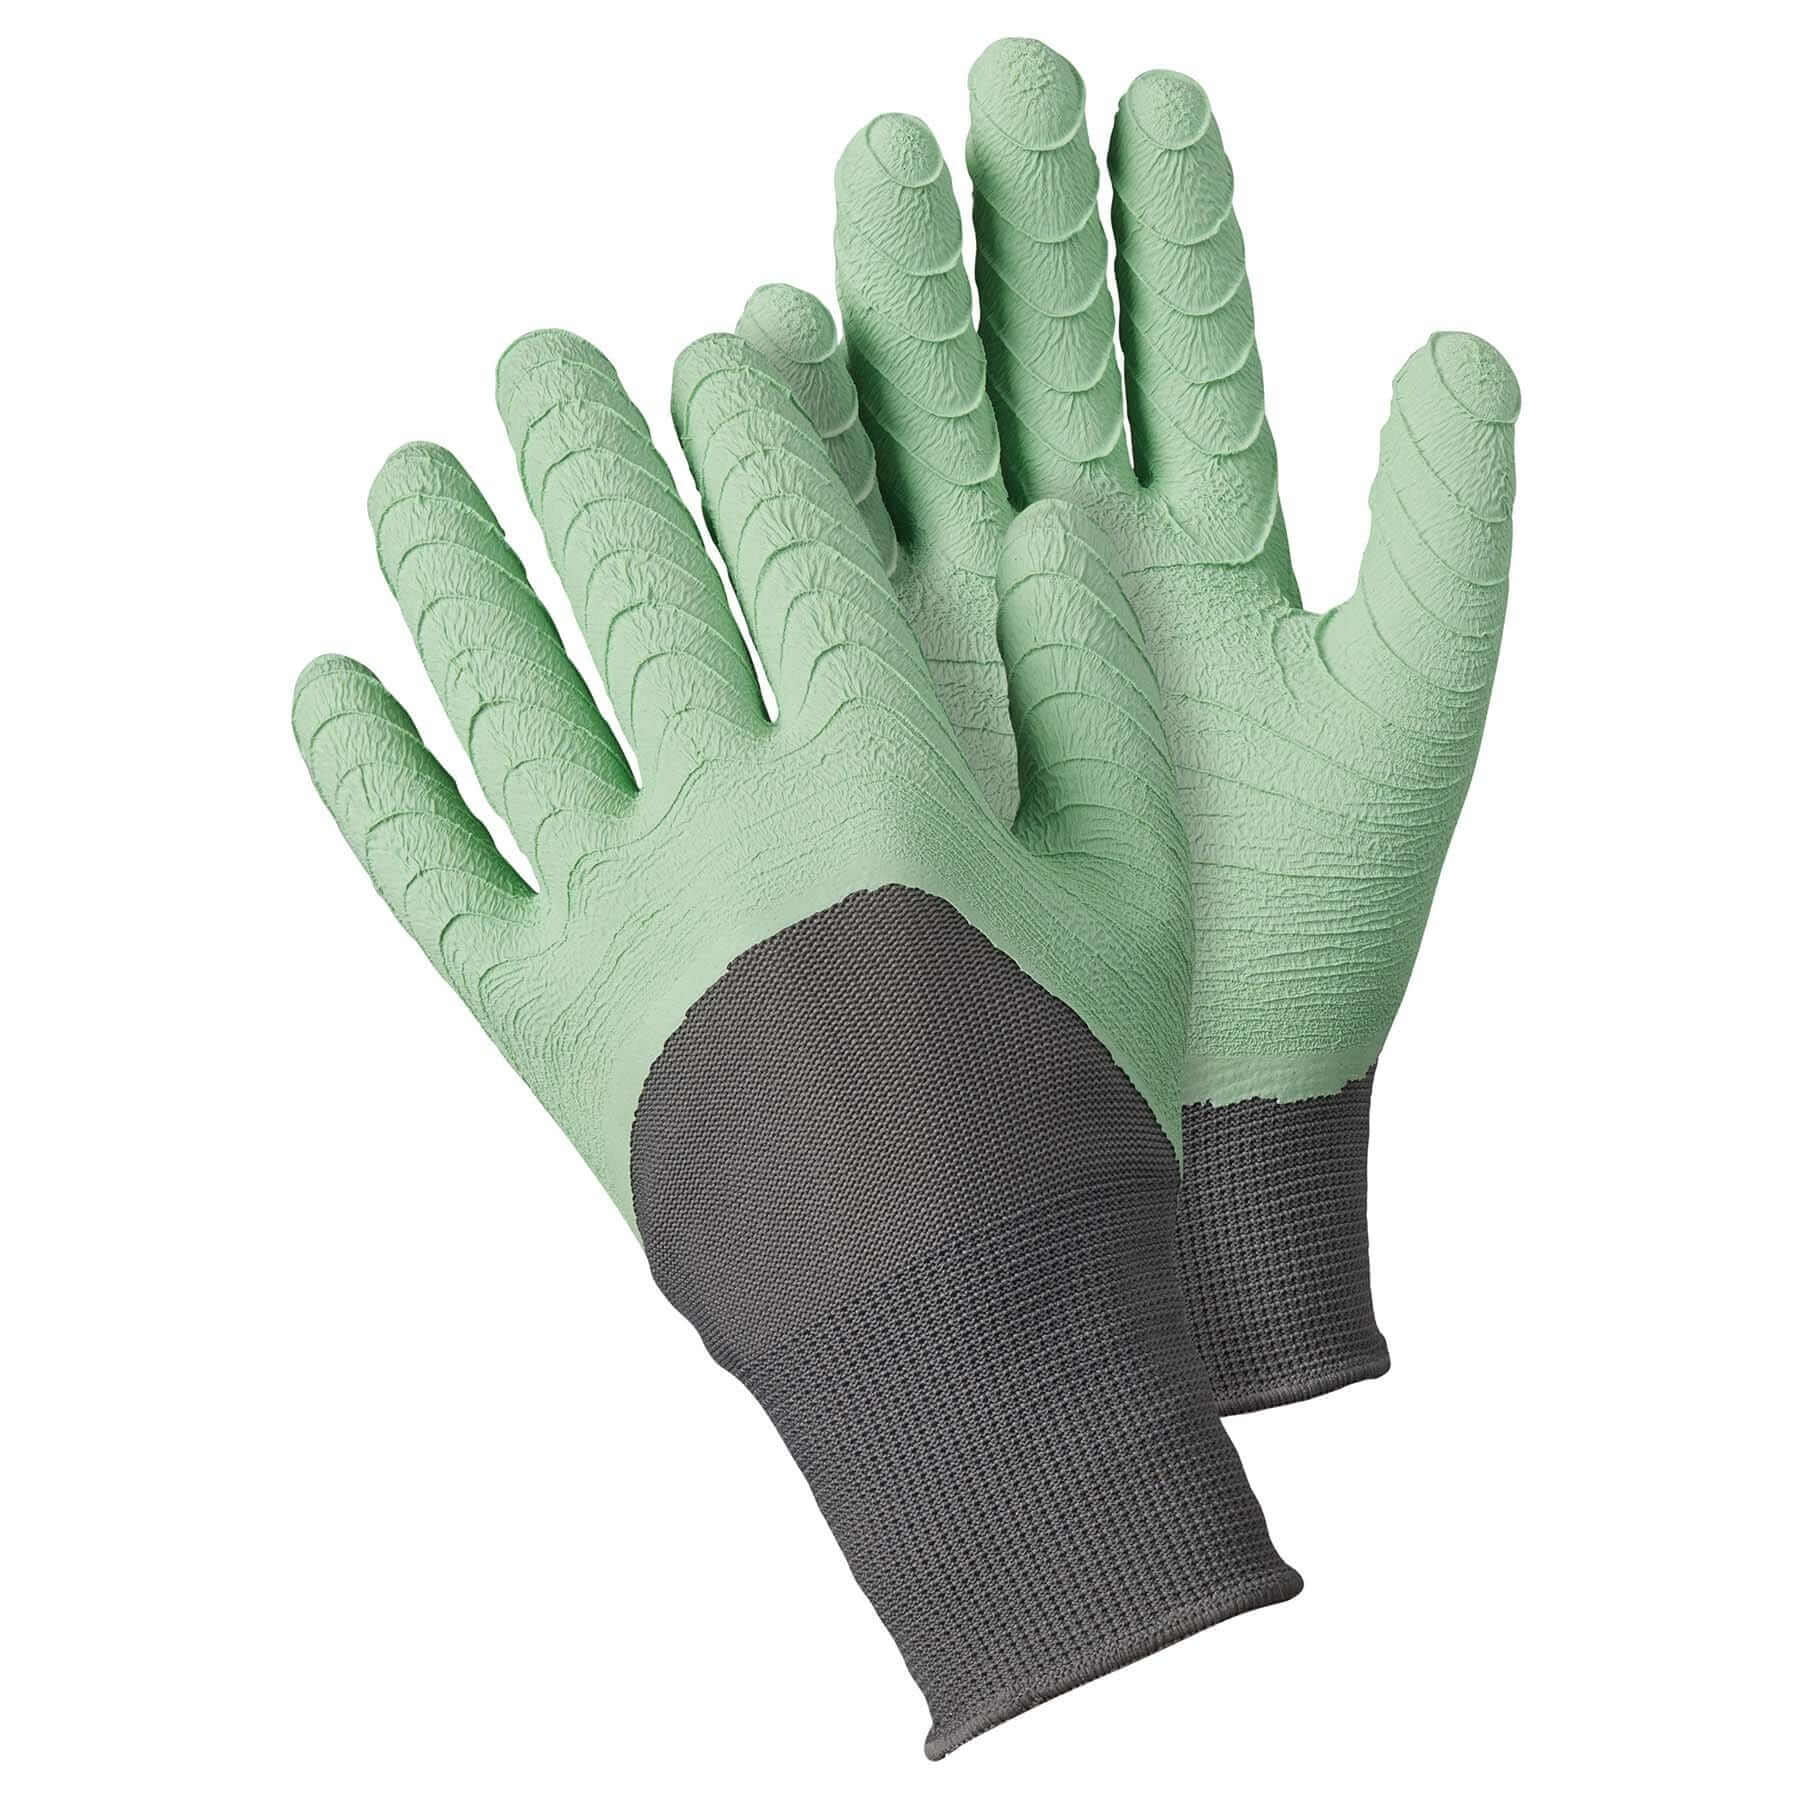 Briers All Seasons Gardening Gloves, latex coated, size medium, Sage colour  from Gardening Requisites 4.29